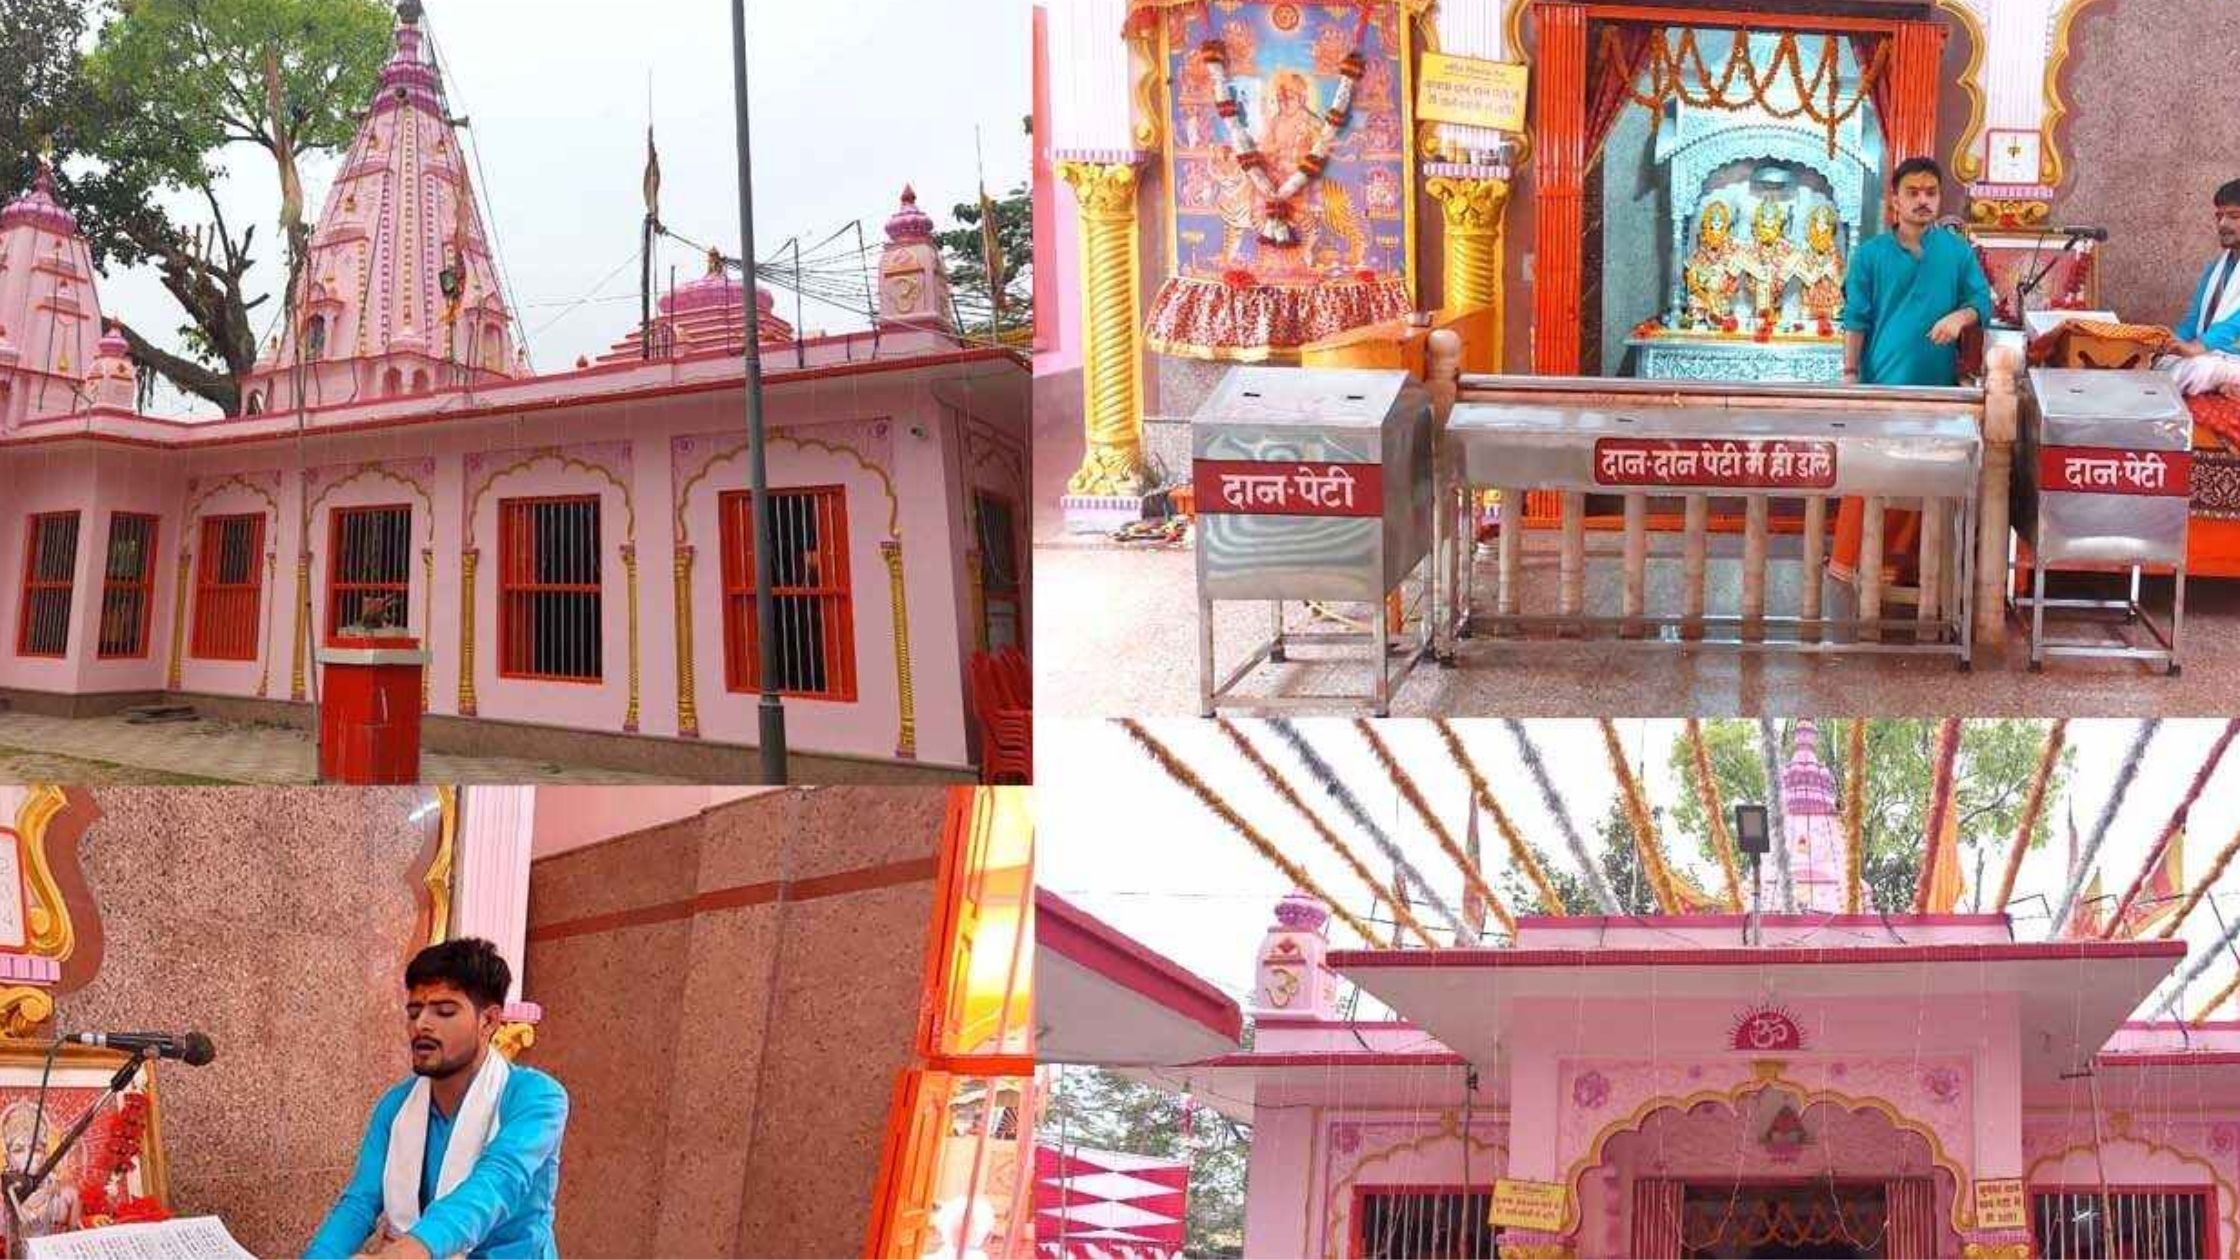 Ramayana lesson running nonstop for 40 years in this temple of Bihar